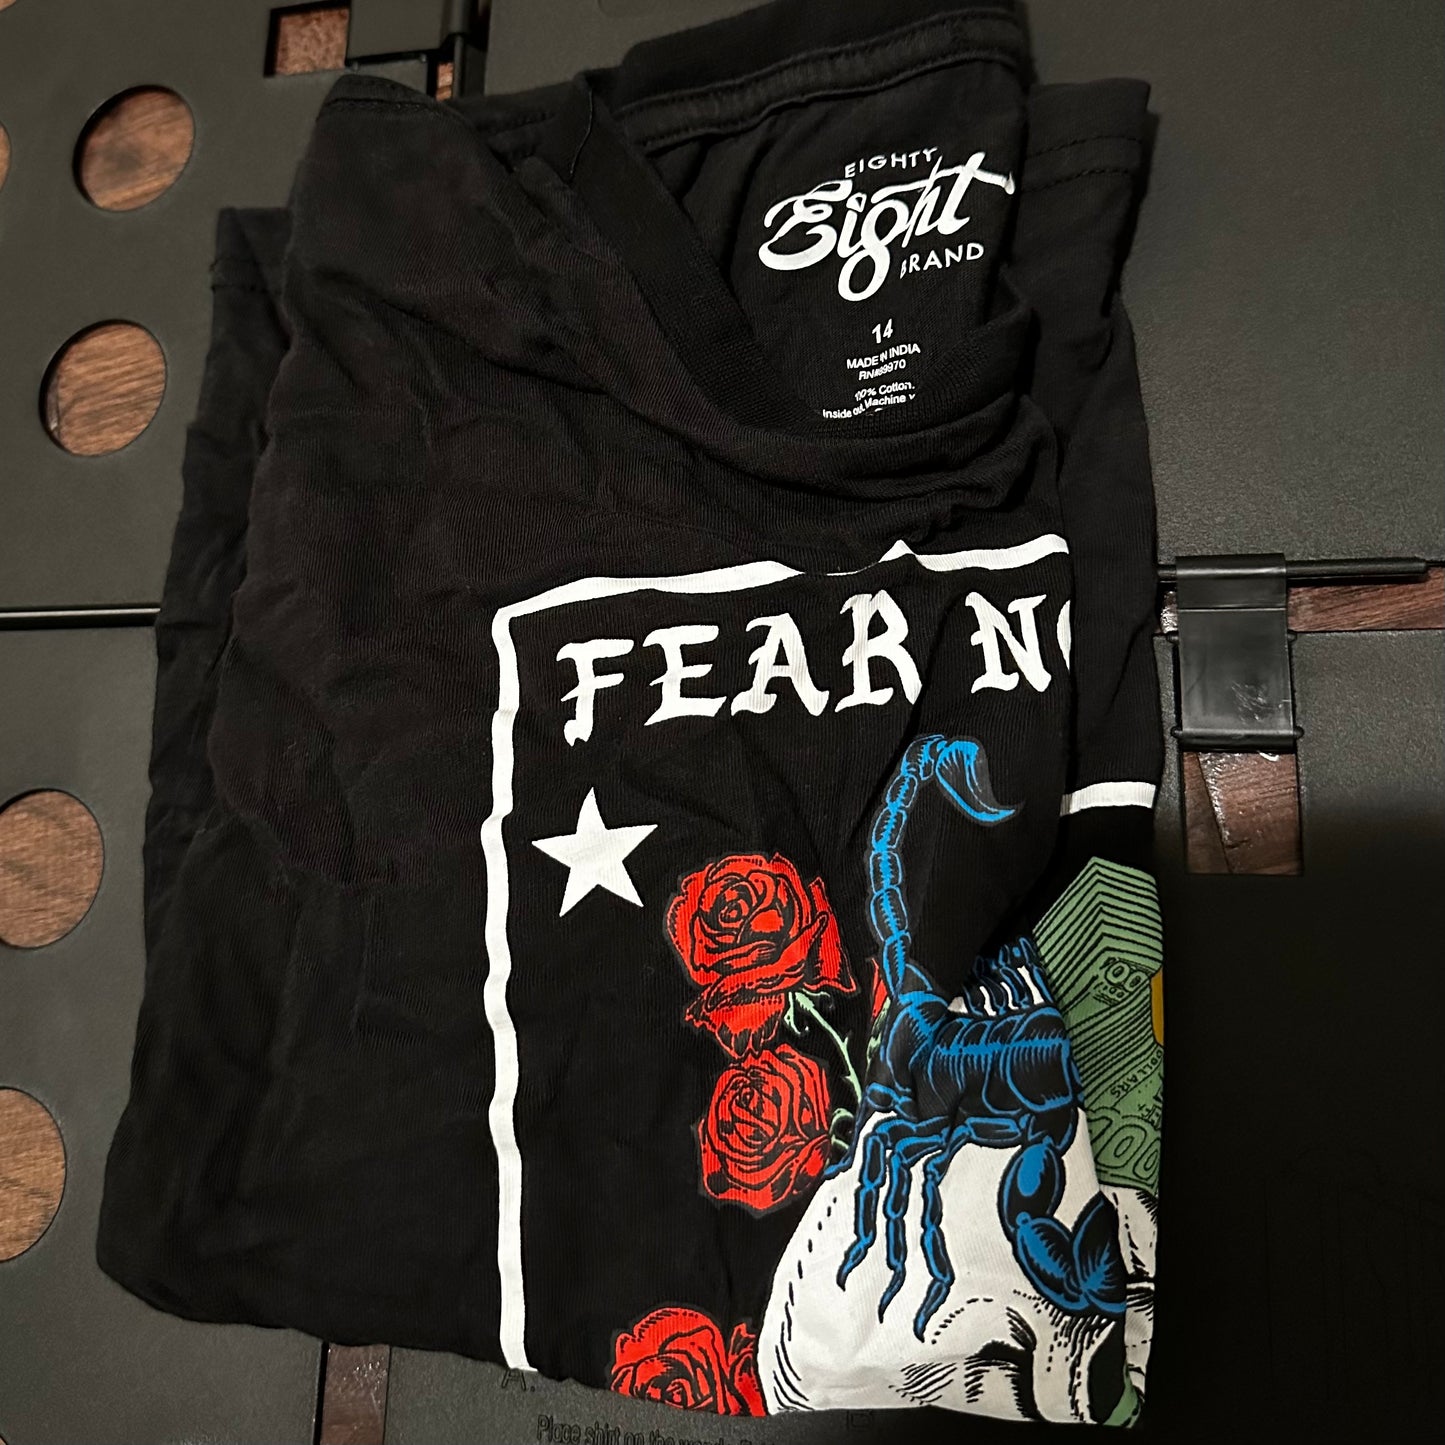 Eighty eight brand fear nothing shirt - Youth Large